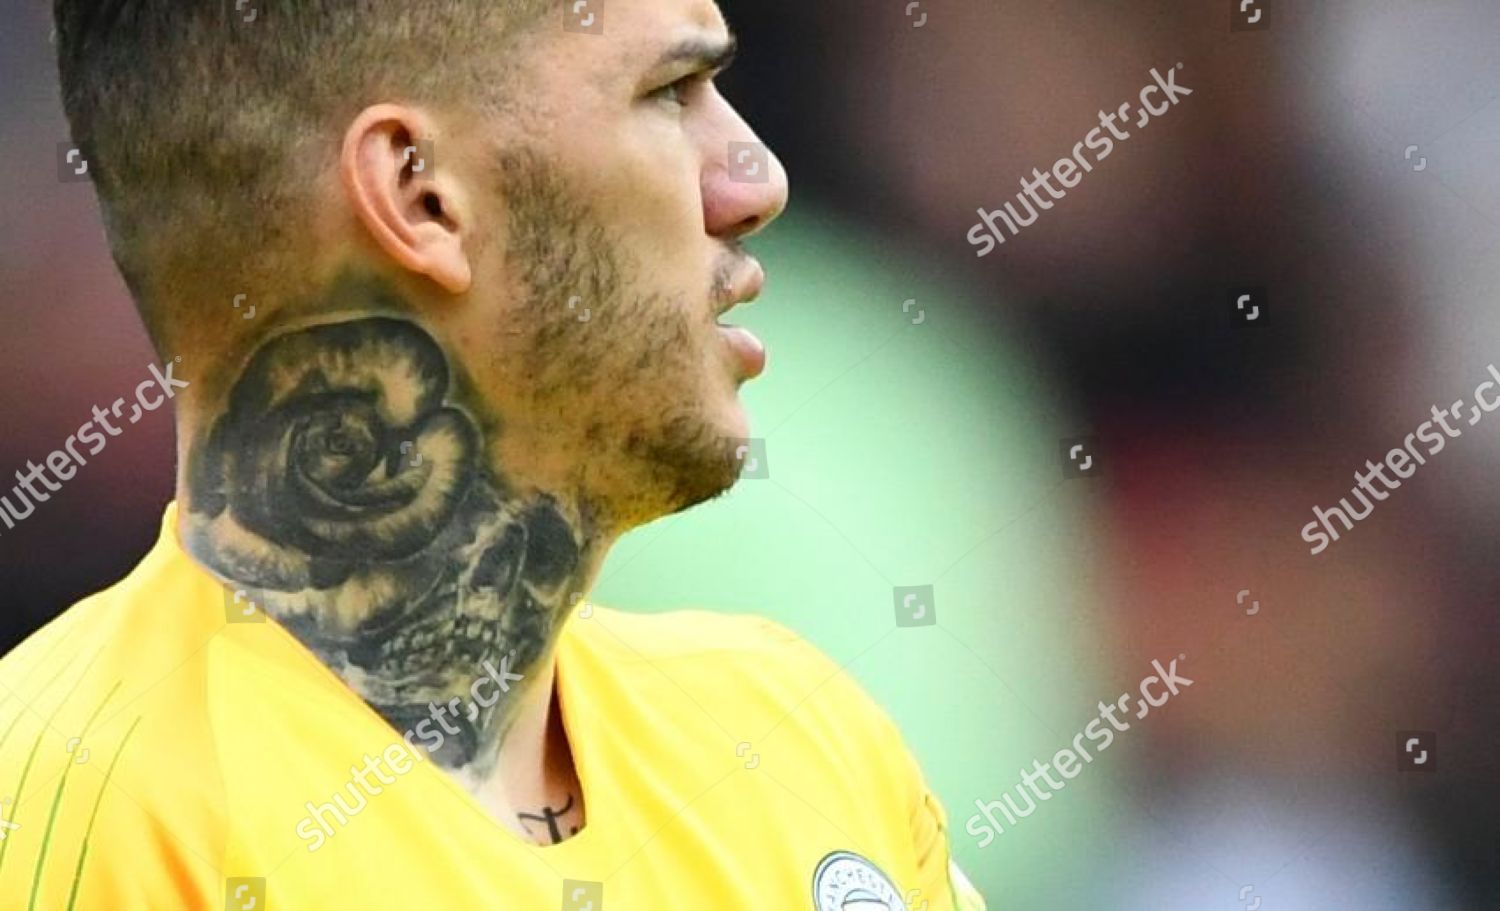 Milton Keynes UK 20th Nov 2018 The smiley face tattoo on the neck of  Goalkeeper Ederson Manchester City of Brazil during the International  match between Brazil and Cameroon at stadiummk Milton Keynes